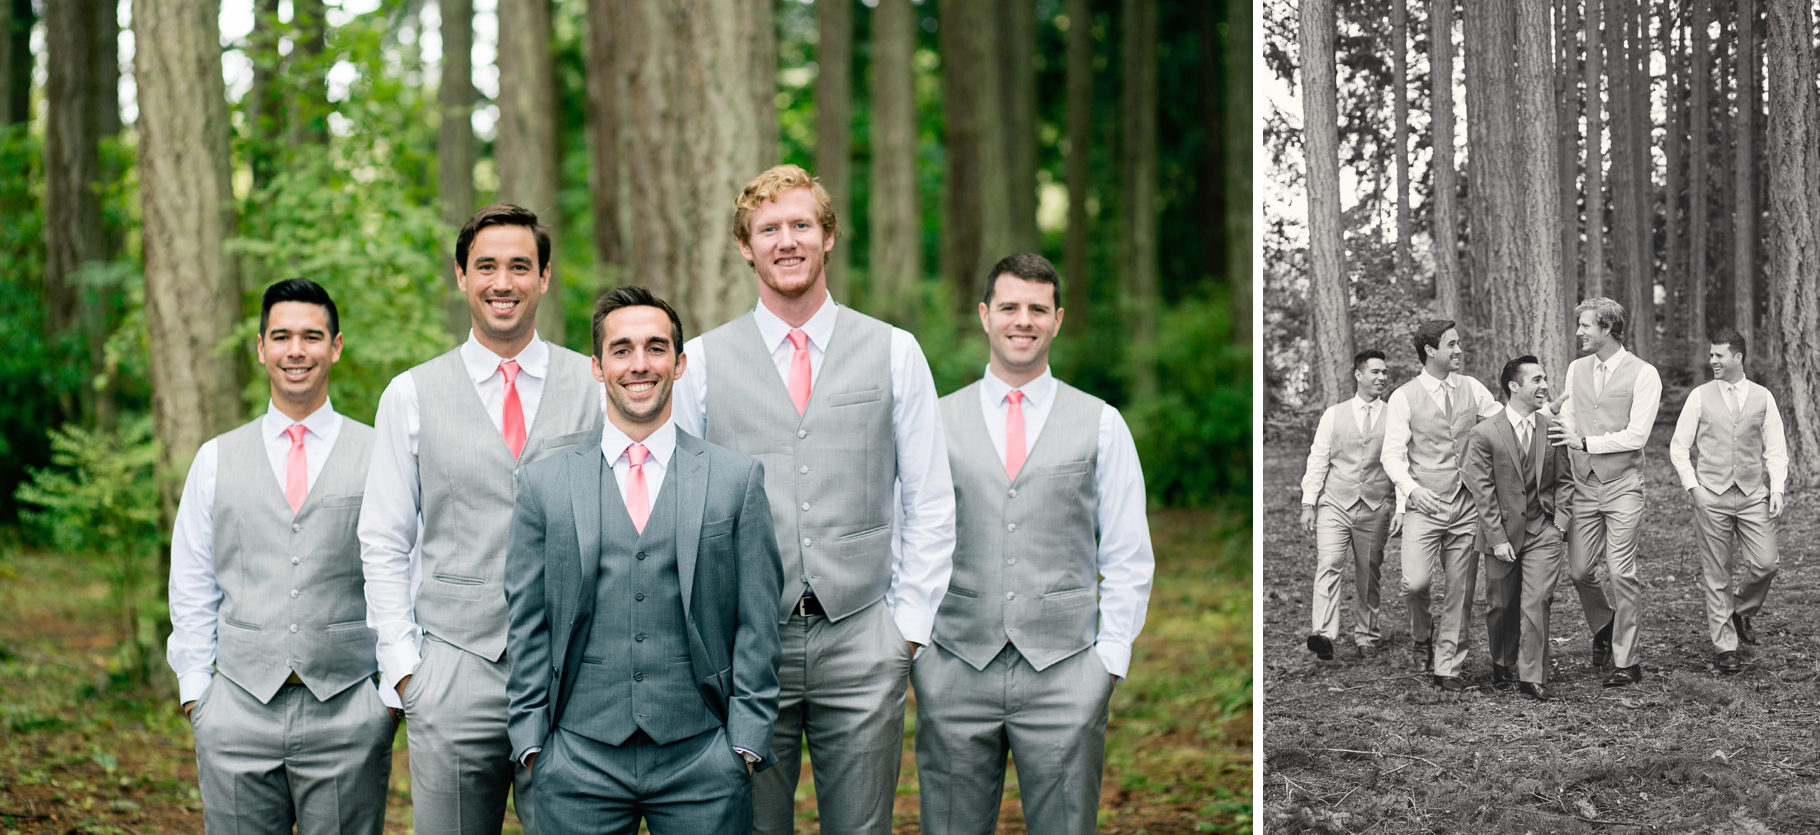 22-Groom-Groomsmen-Portraits-Grey-Suit-wooded-bluff-olympic-mountains-log-cabin-Kitsap-Memorial-State-Park-Forest-Northwest-Photographer-Seattle-Wedding-Photography-by-Betty-Elaine